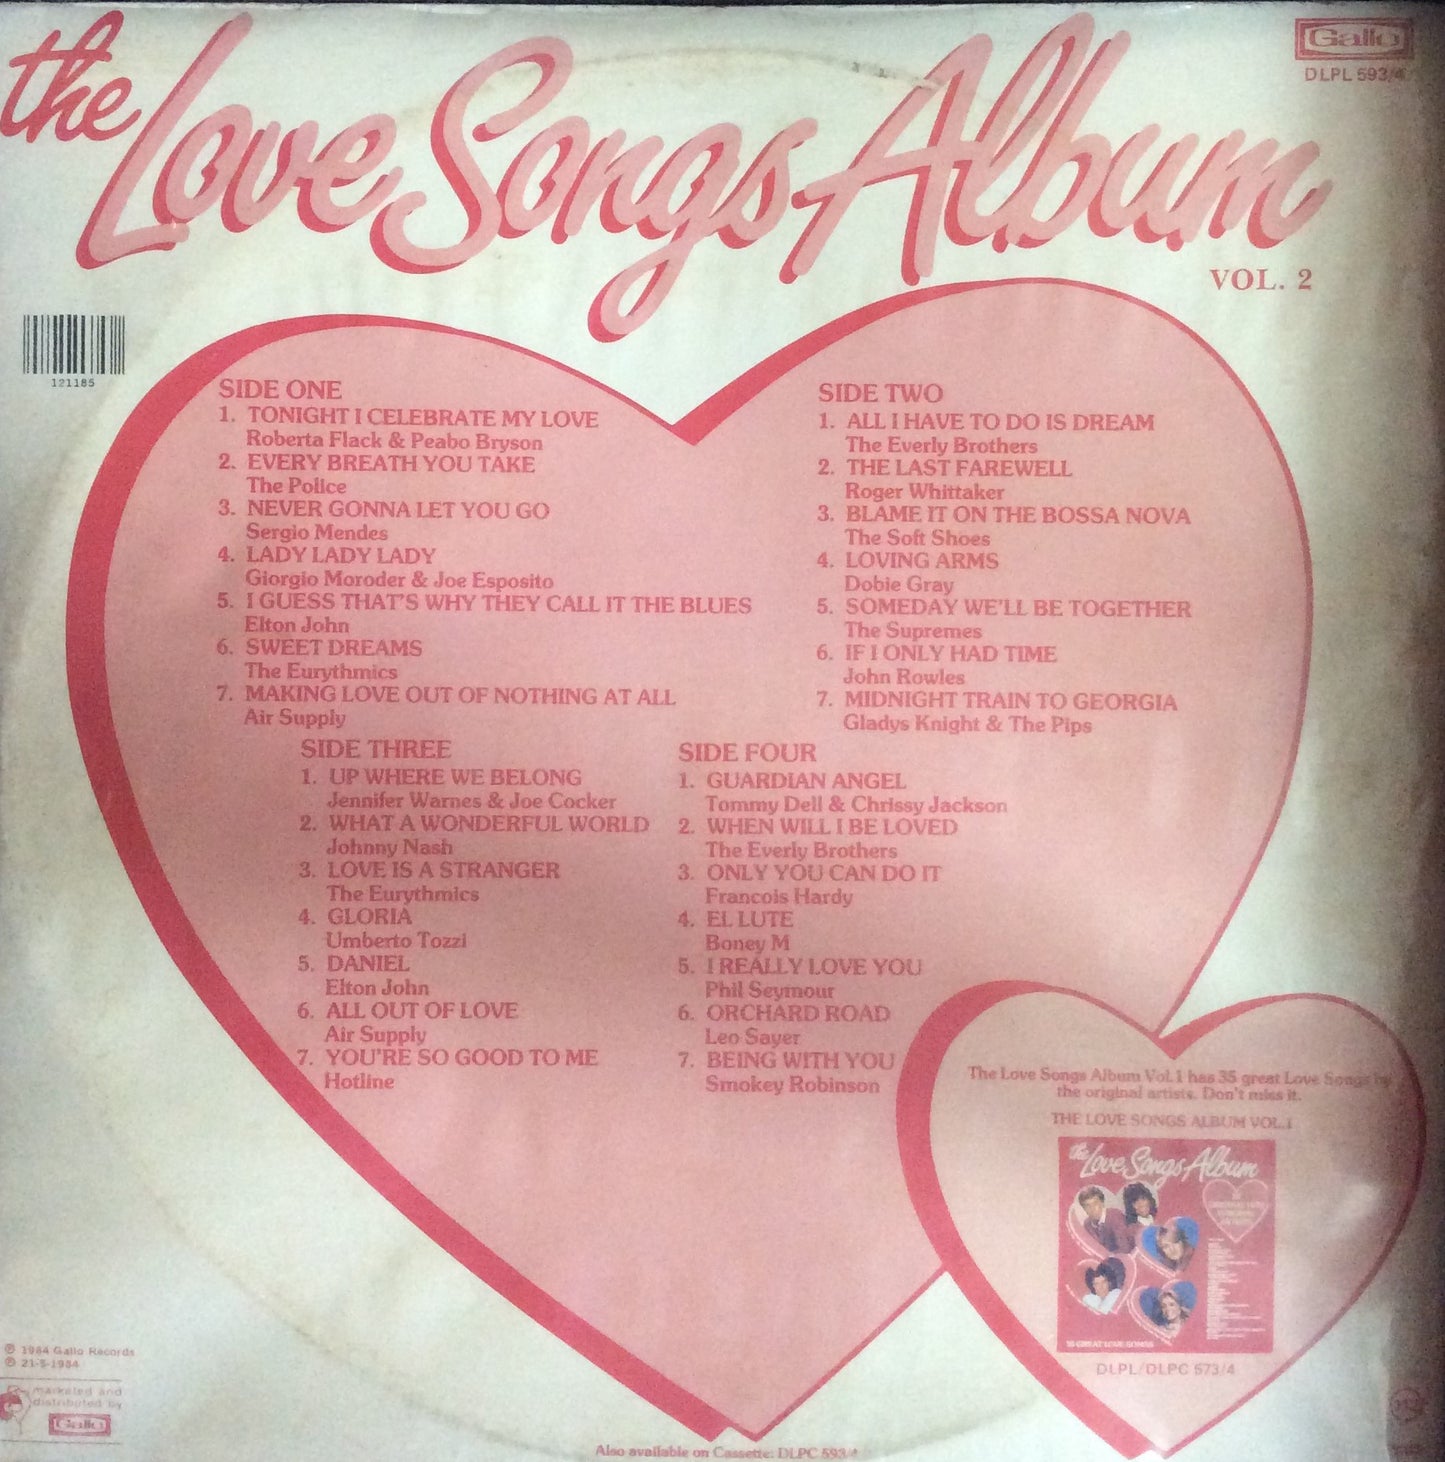 Various Artists - The Love Songs Album Vol. 2 (The New Collection)